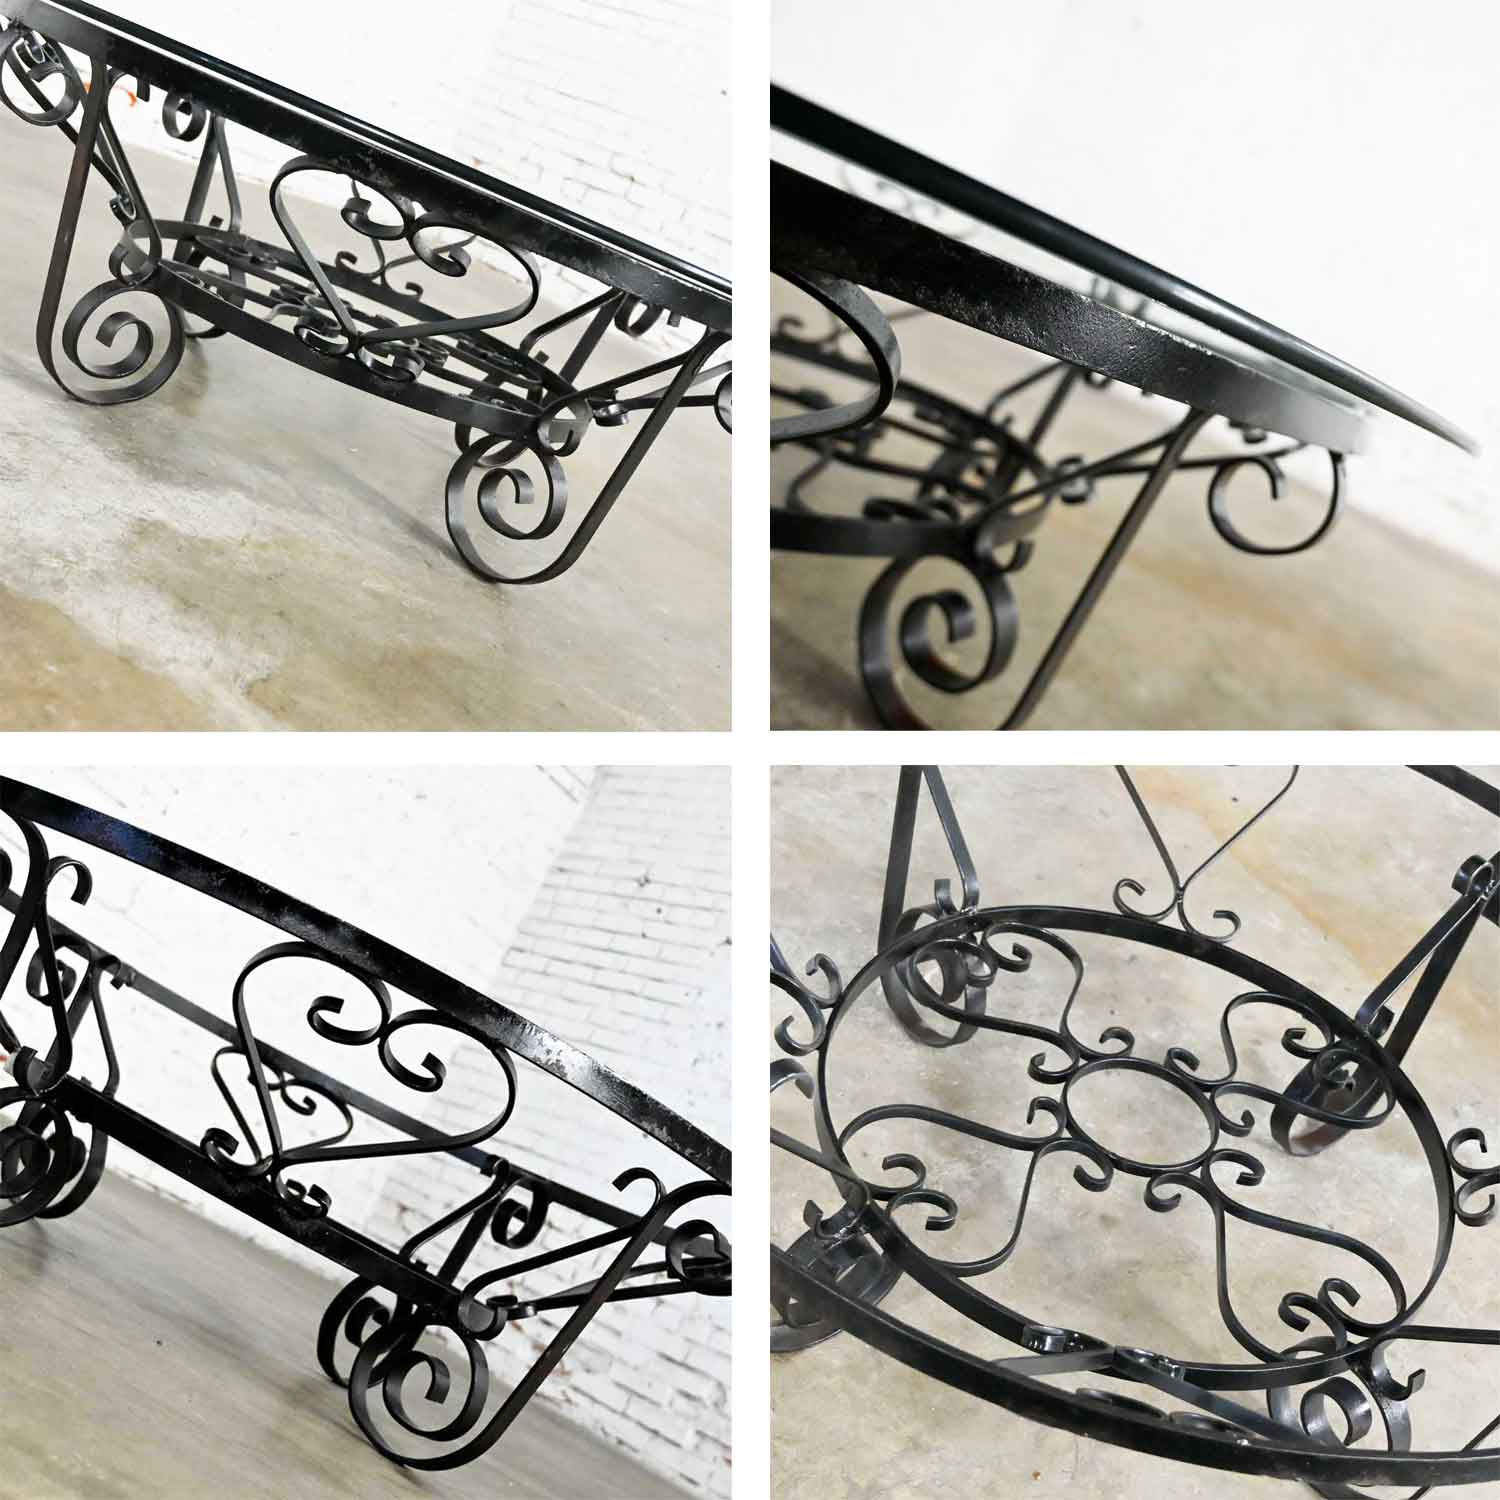 Vintage Rustic Hand Wrought Iron Round Coffee Table with Glass Top